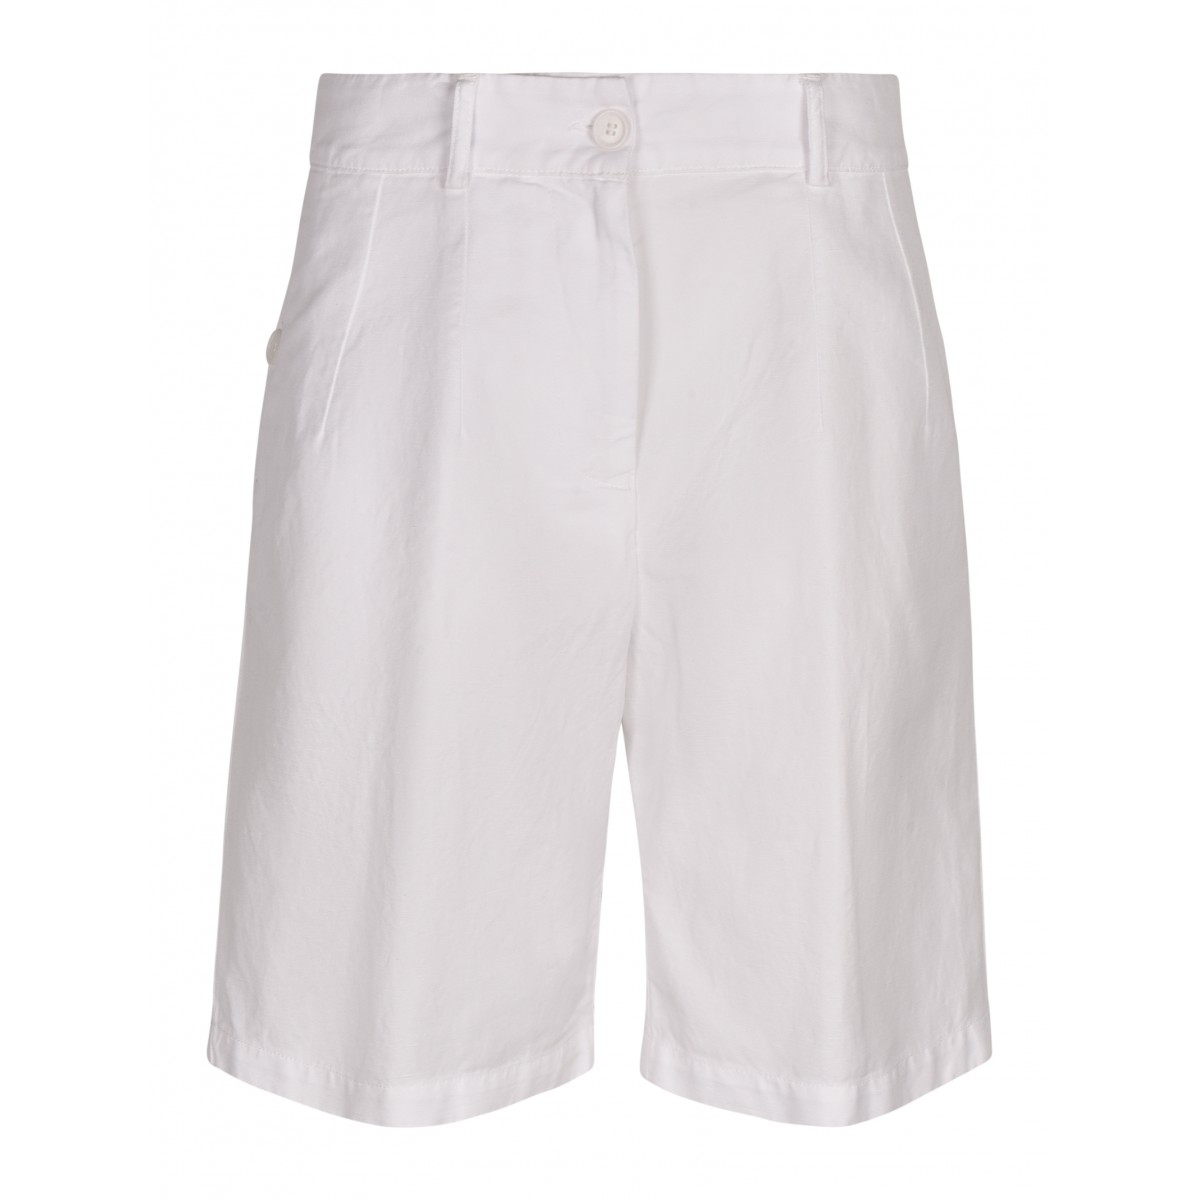 White cotton and linen shorts